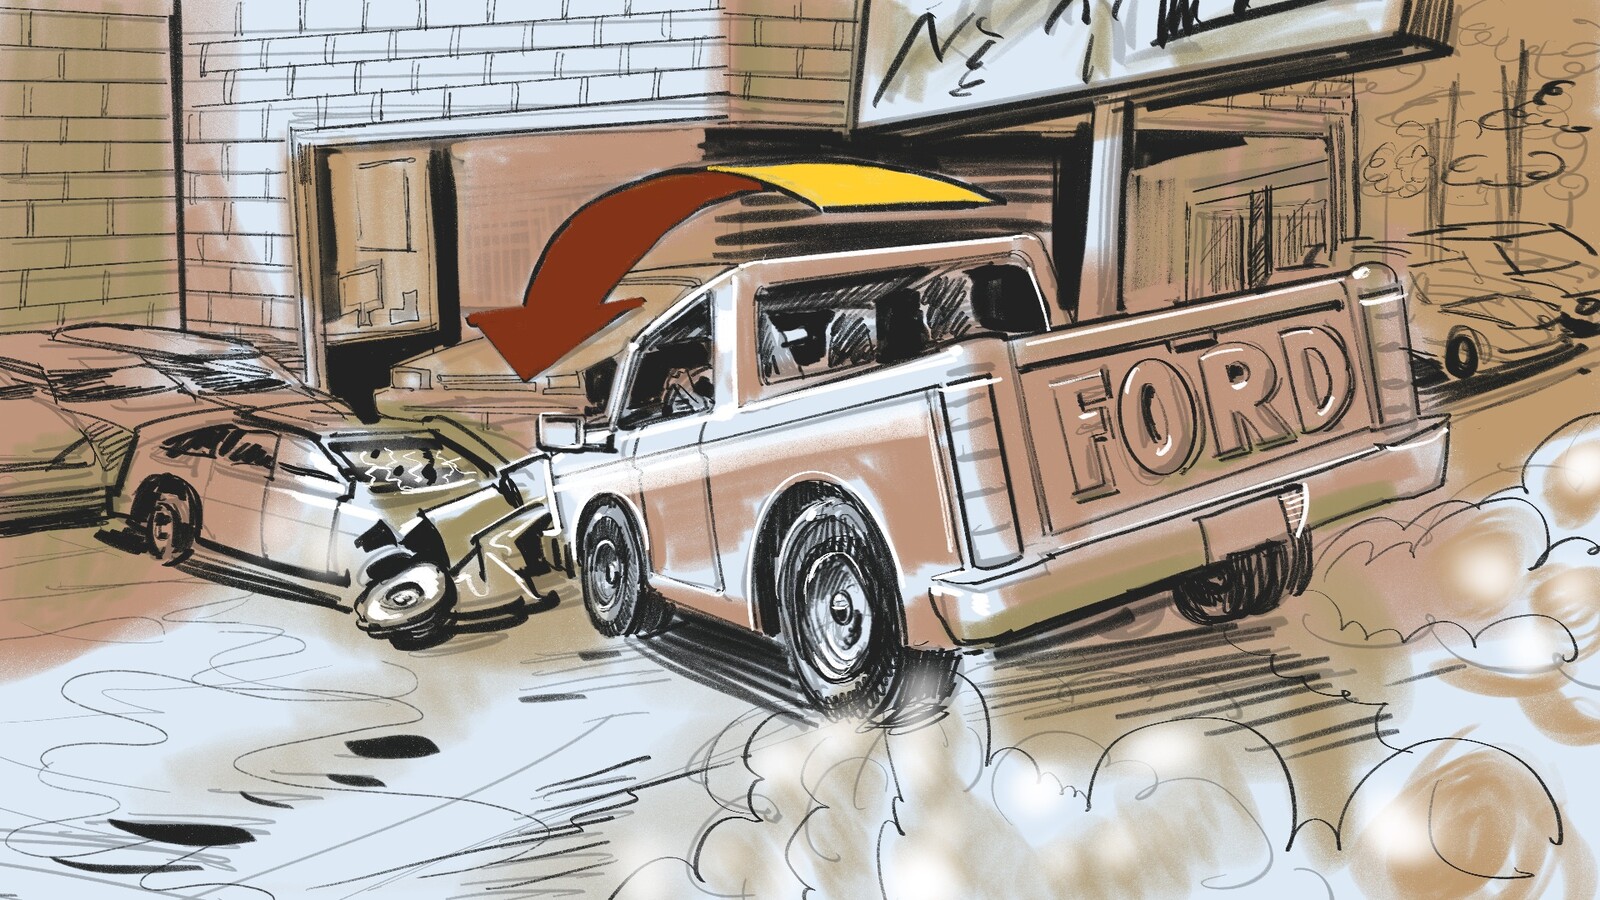 FRAME #22-MS-Med-Floating: Windshield: Haden cuts the wheel into...